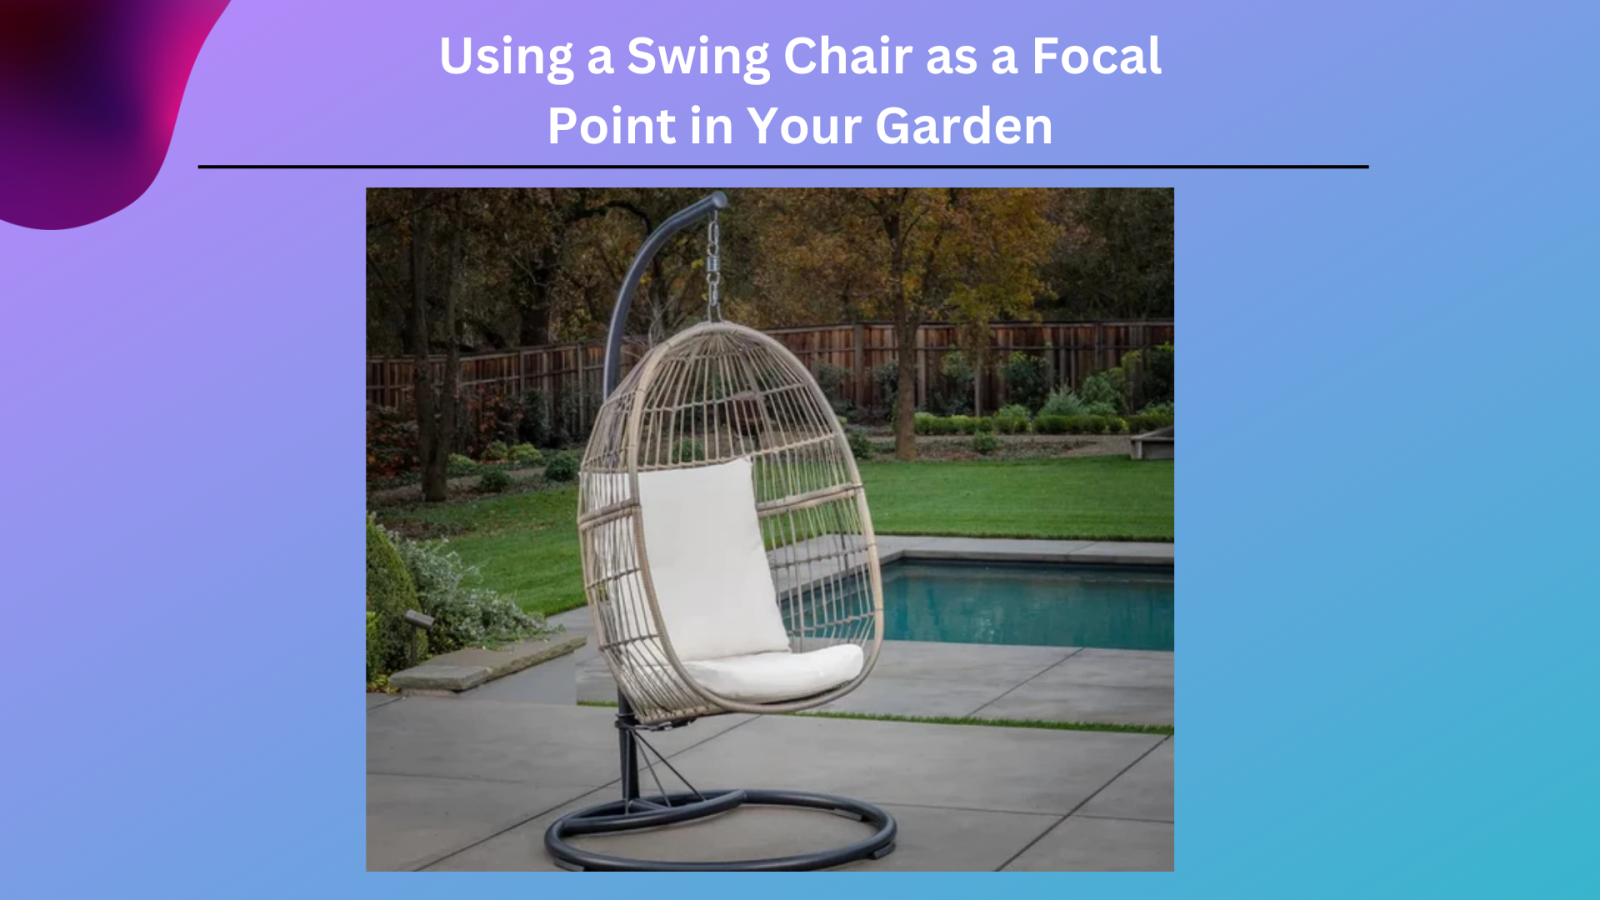 Swing Chair as a Focal Point in Your Garden